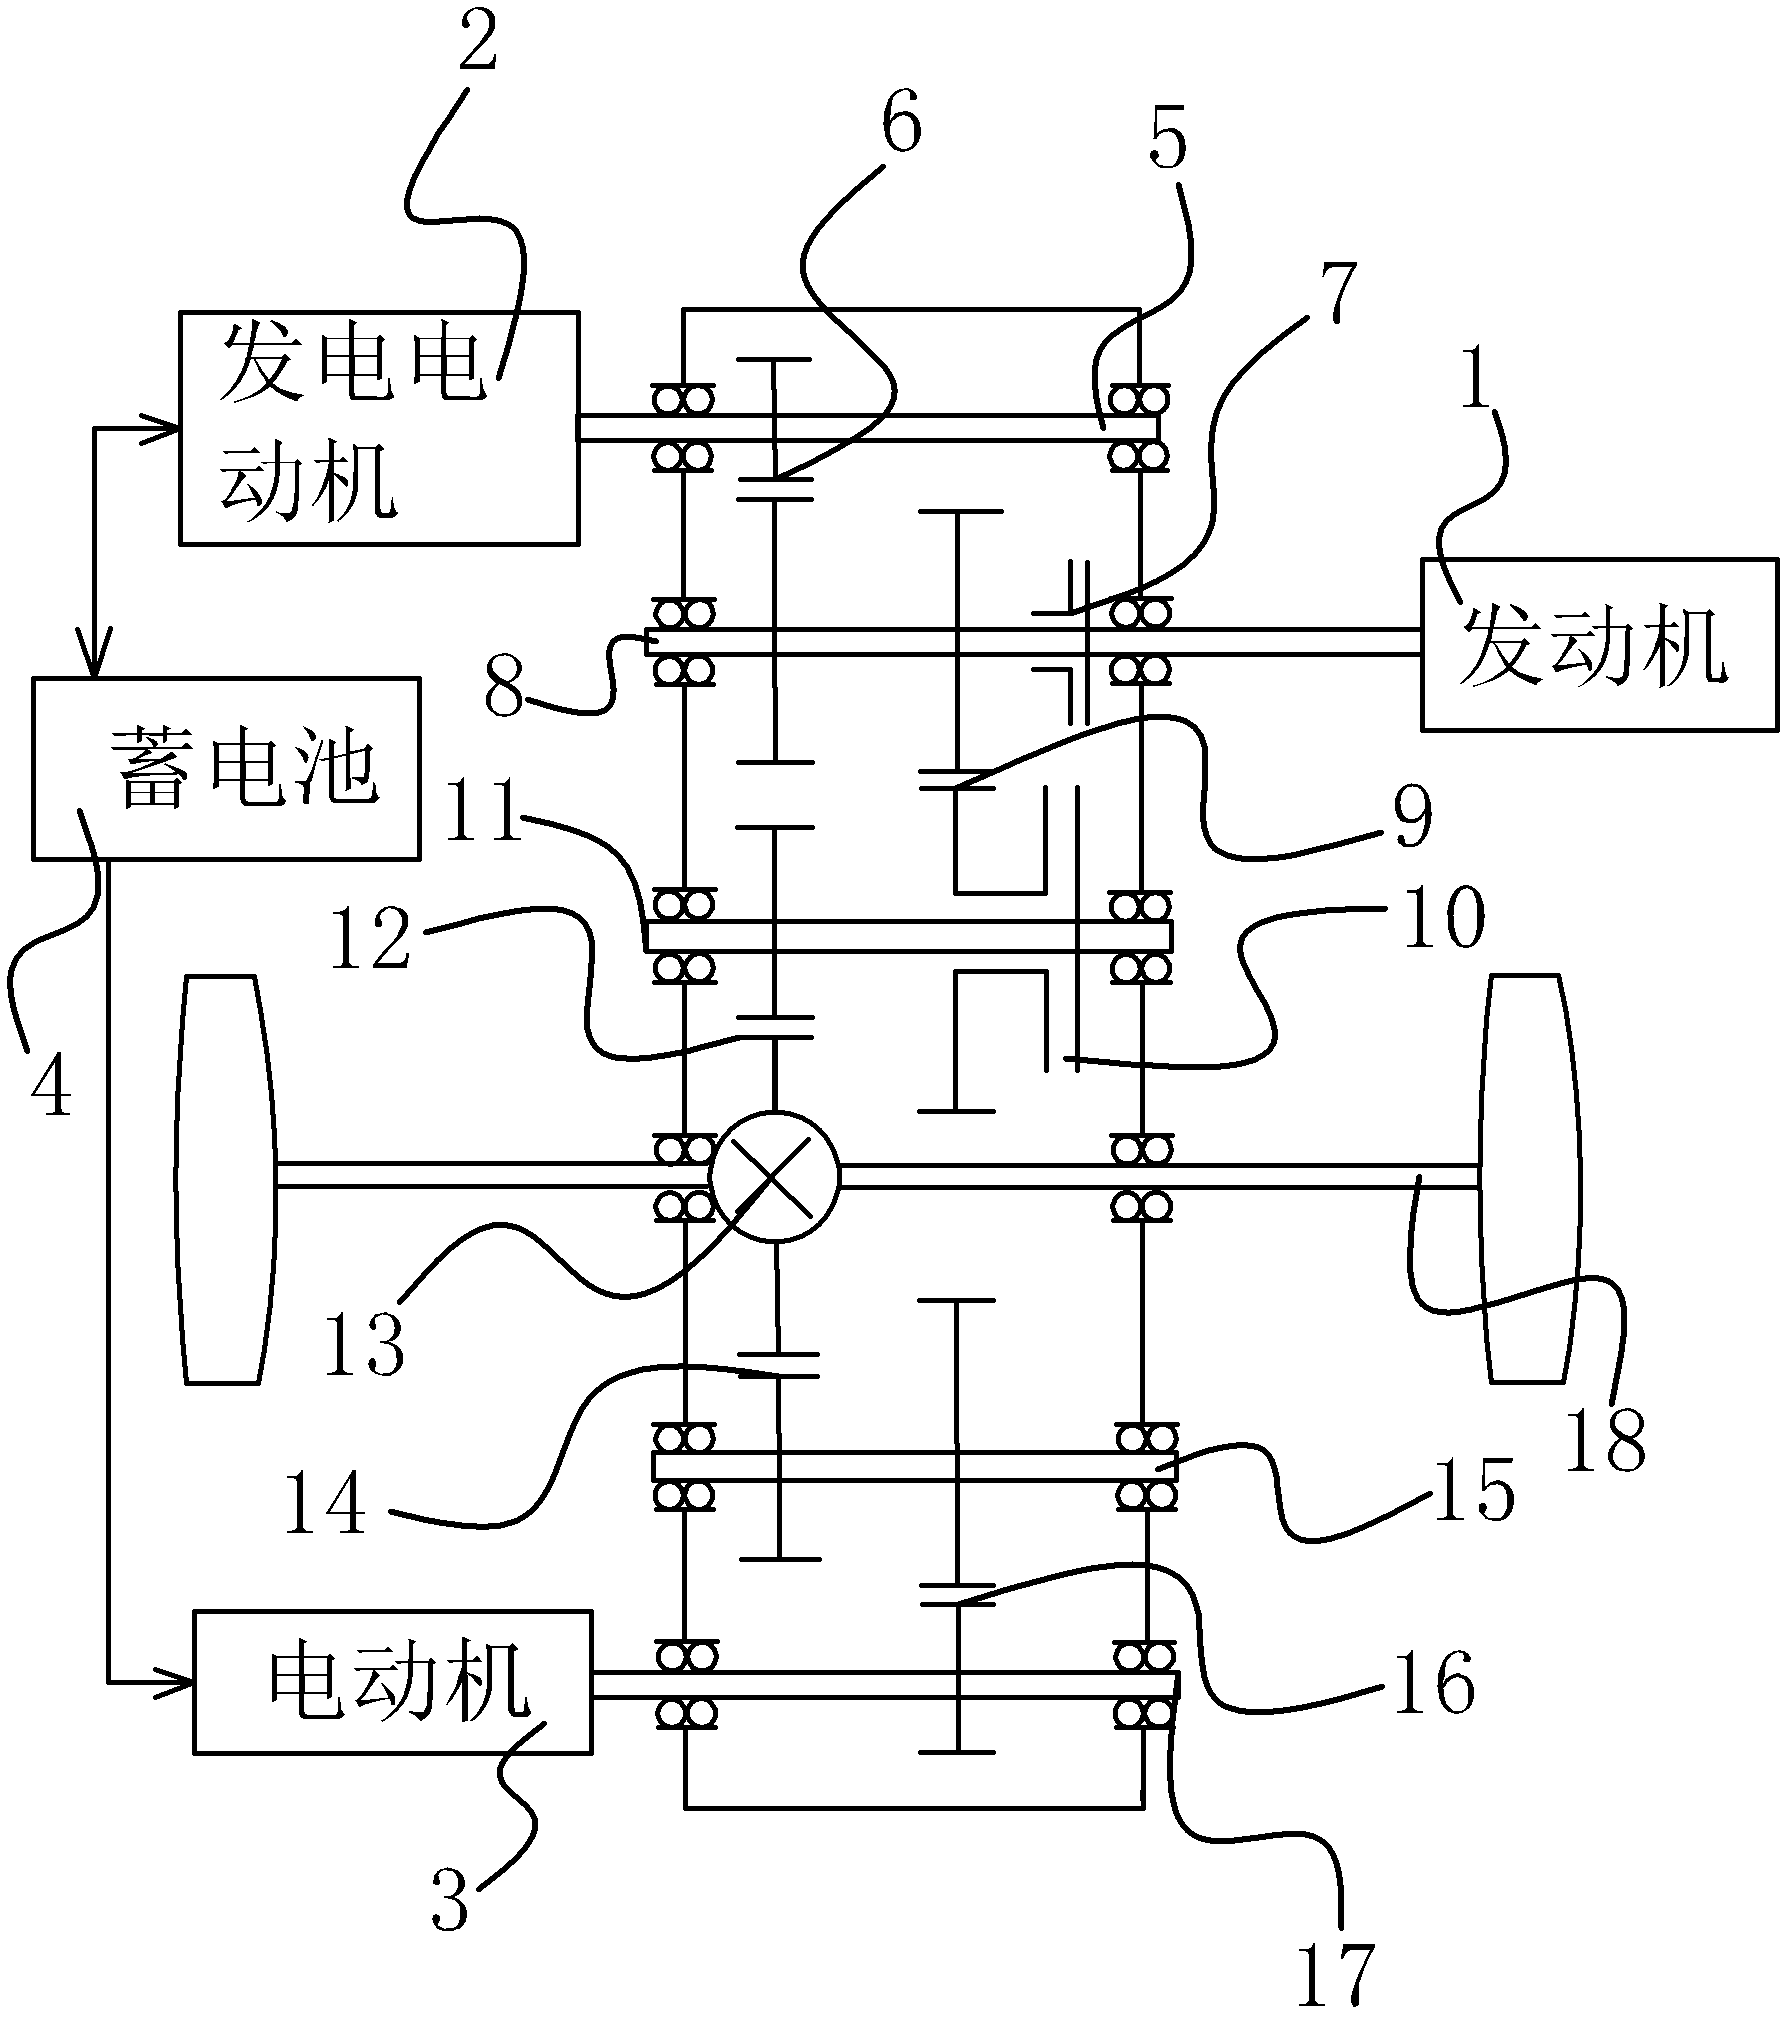 Dual-clutch series-parallel hybrid power driving device and control method thereof